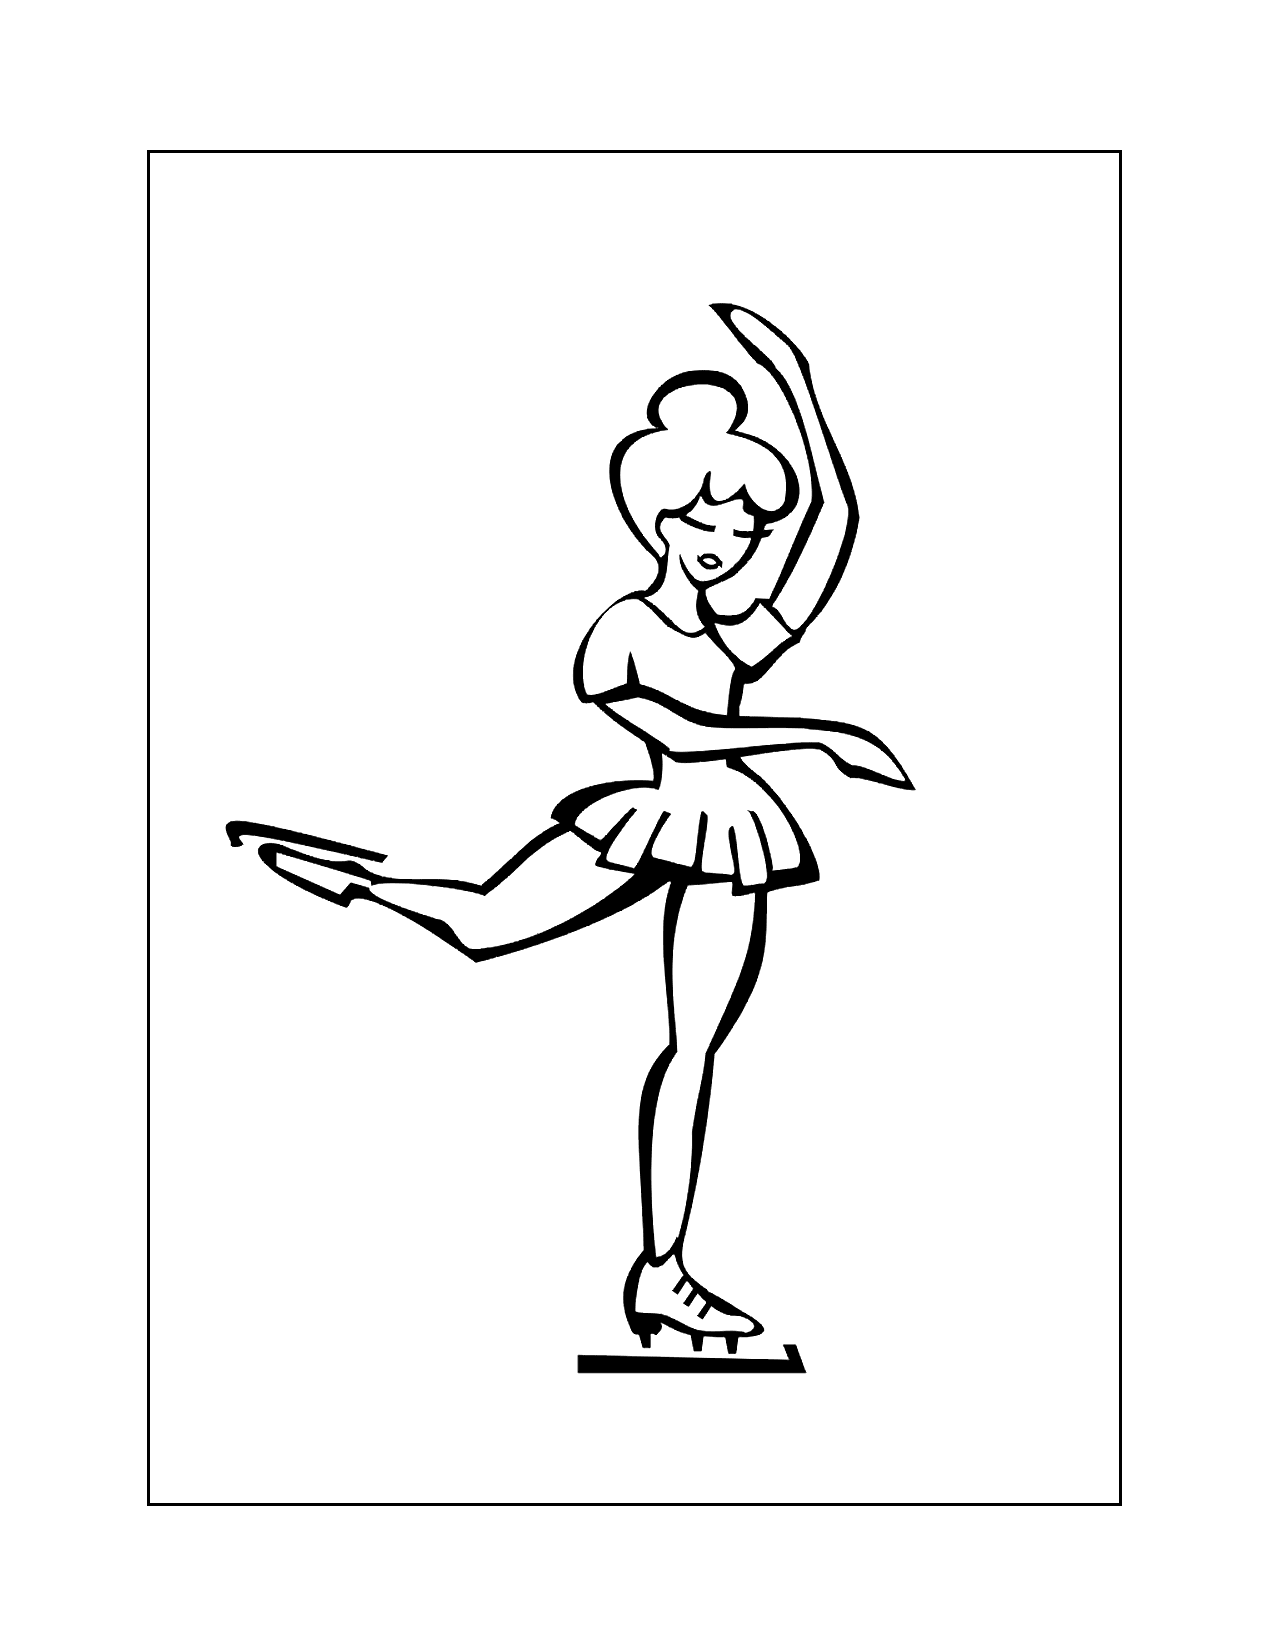 Pretty Figure Skating Character Coloring Page